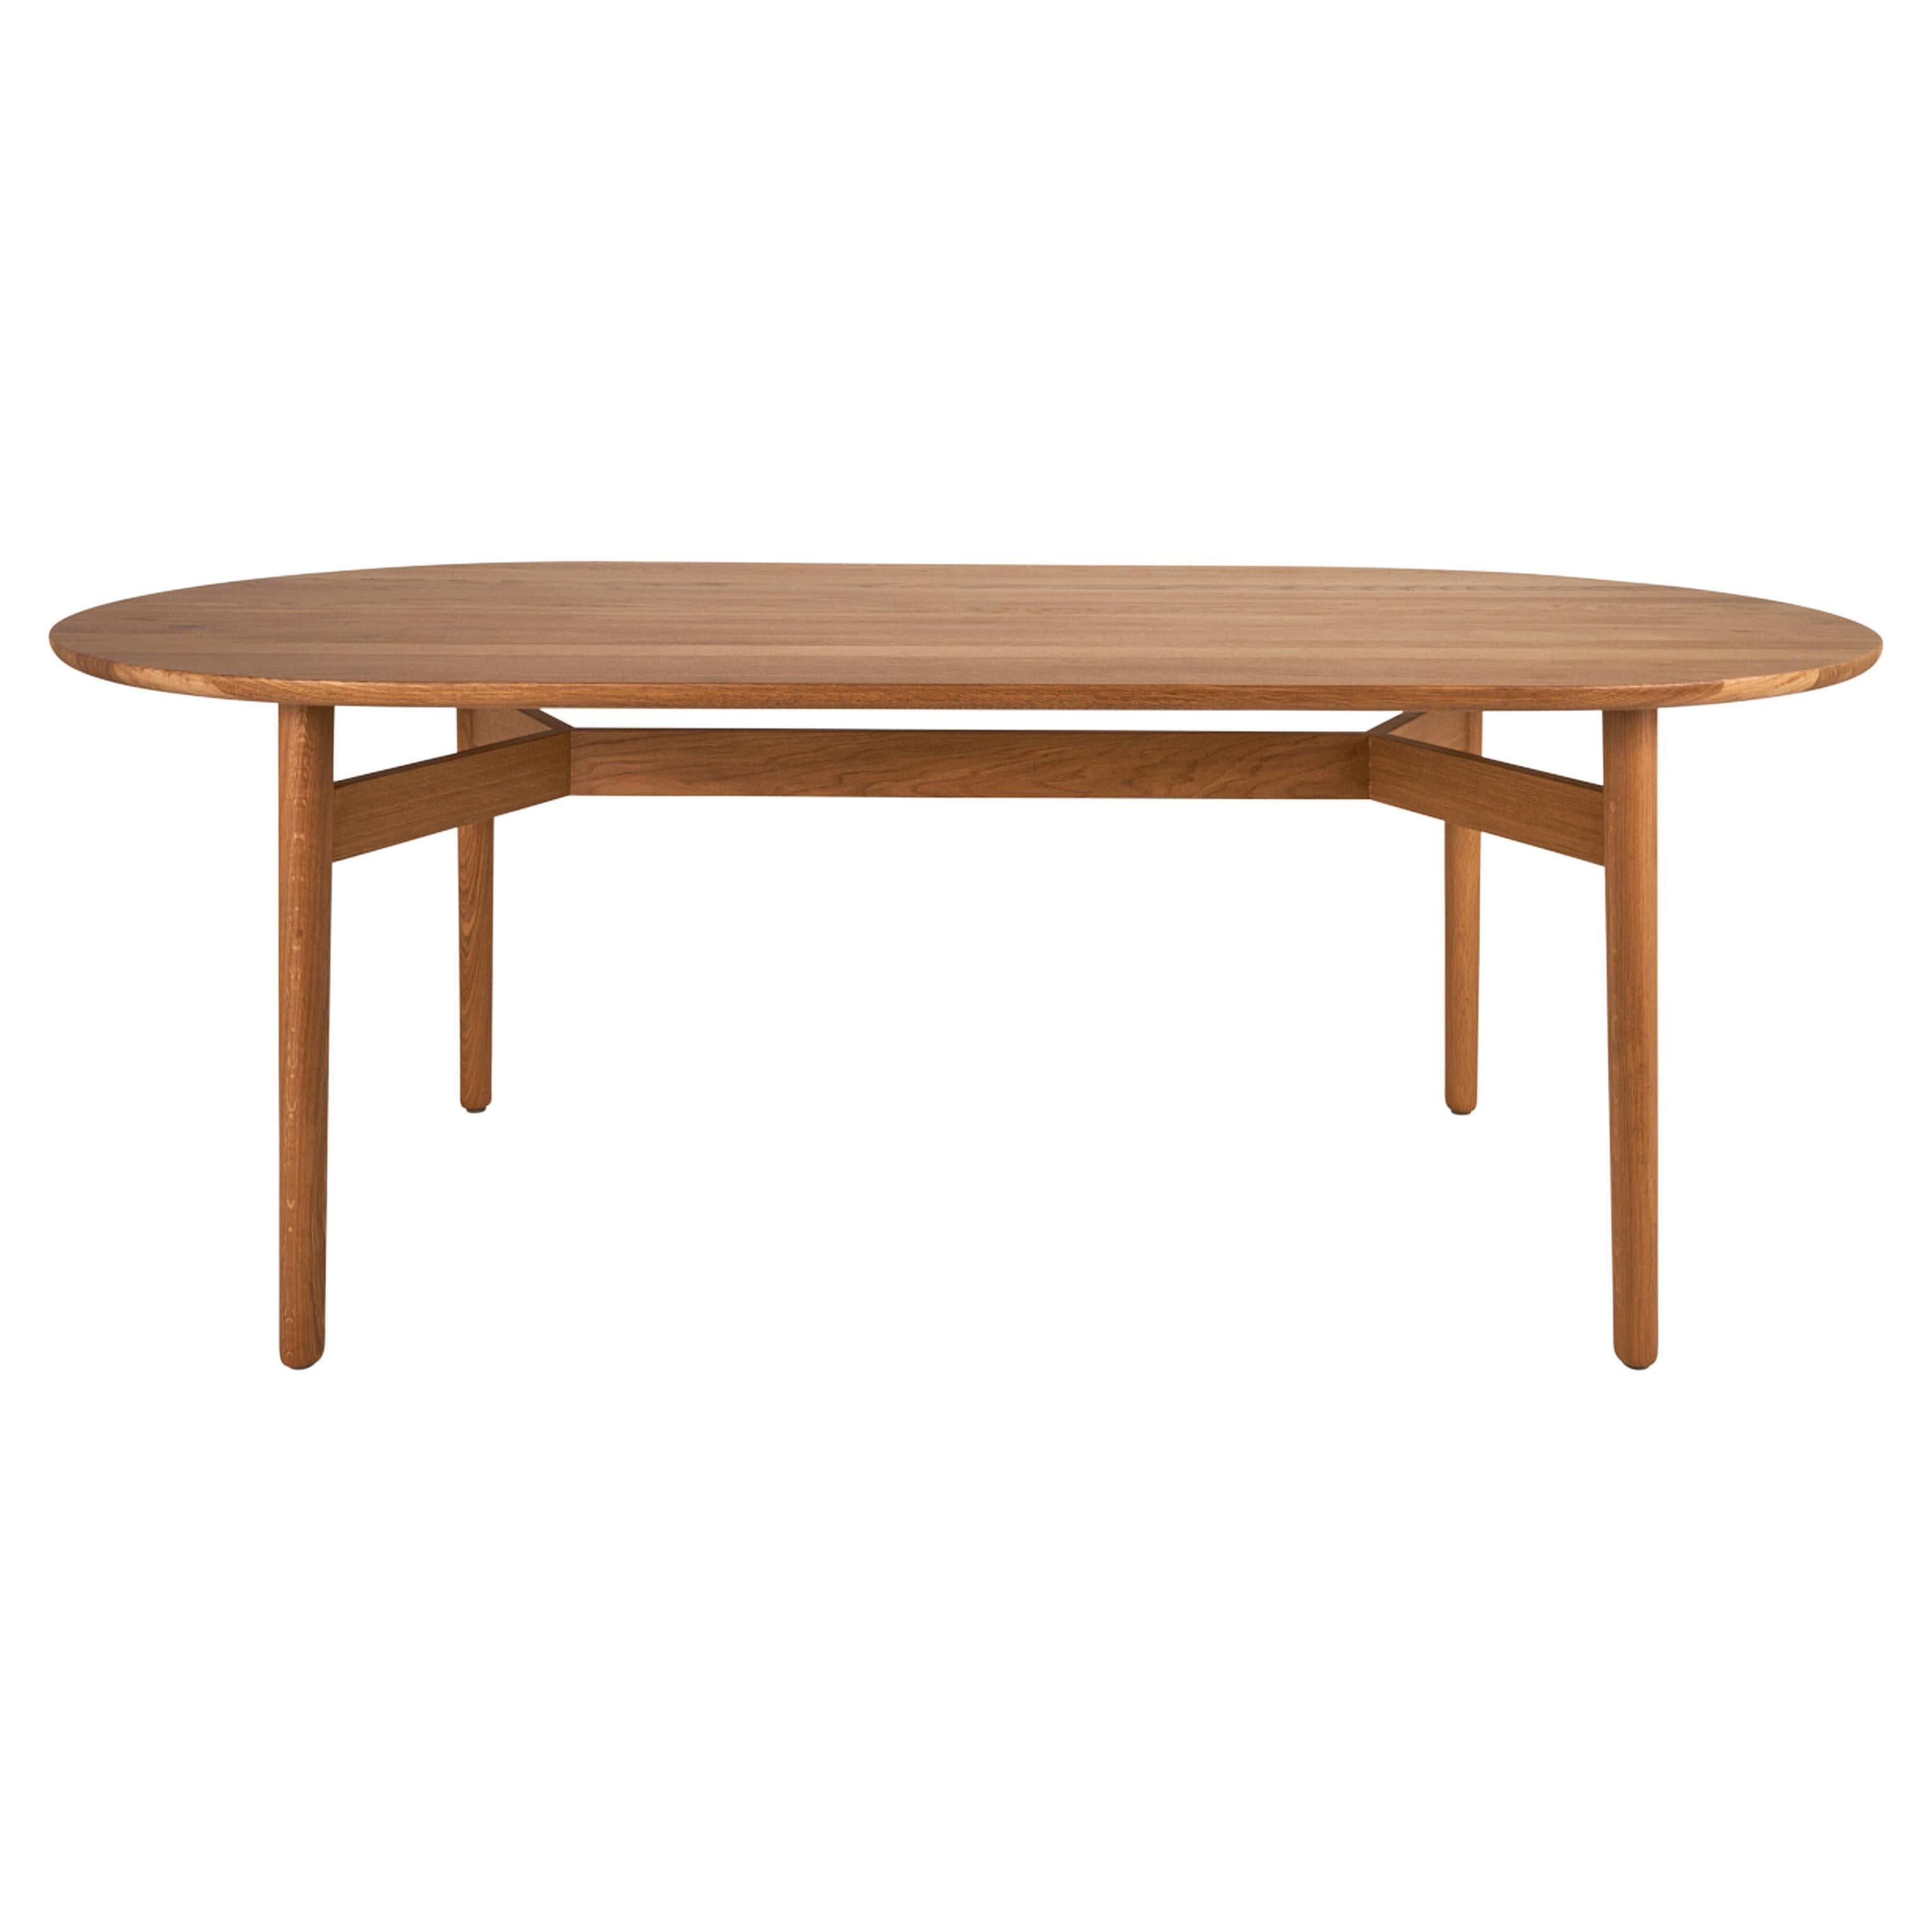 Schumacher Editions Puffin 84" Dining Table in Natural Matte For Sale